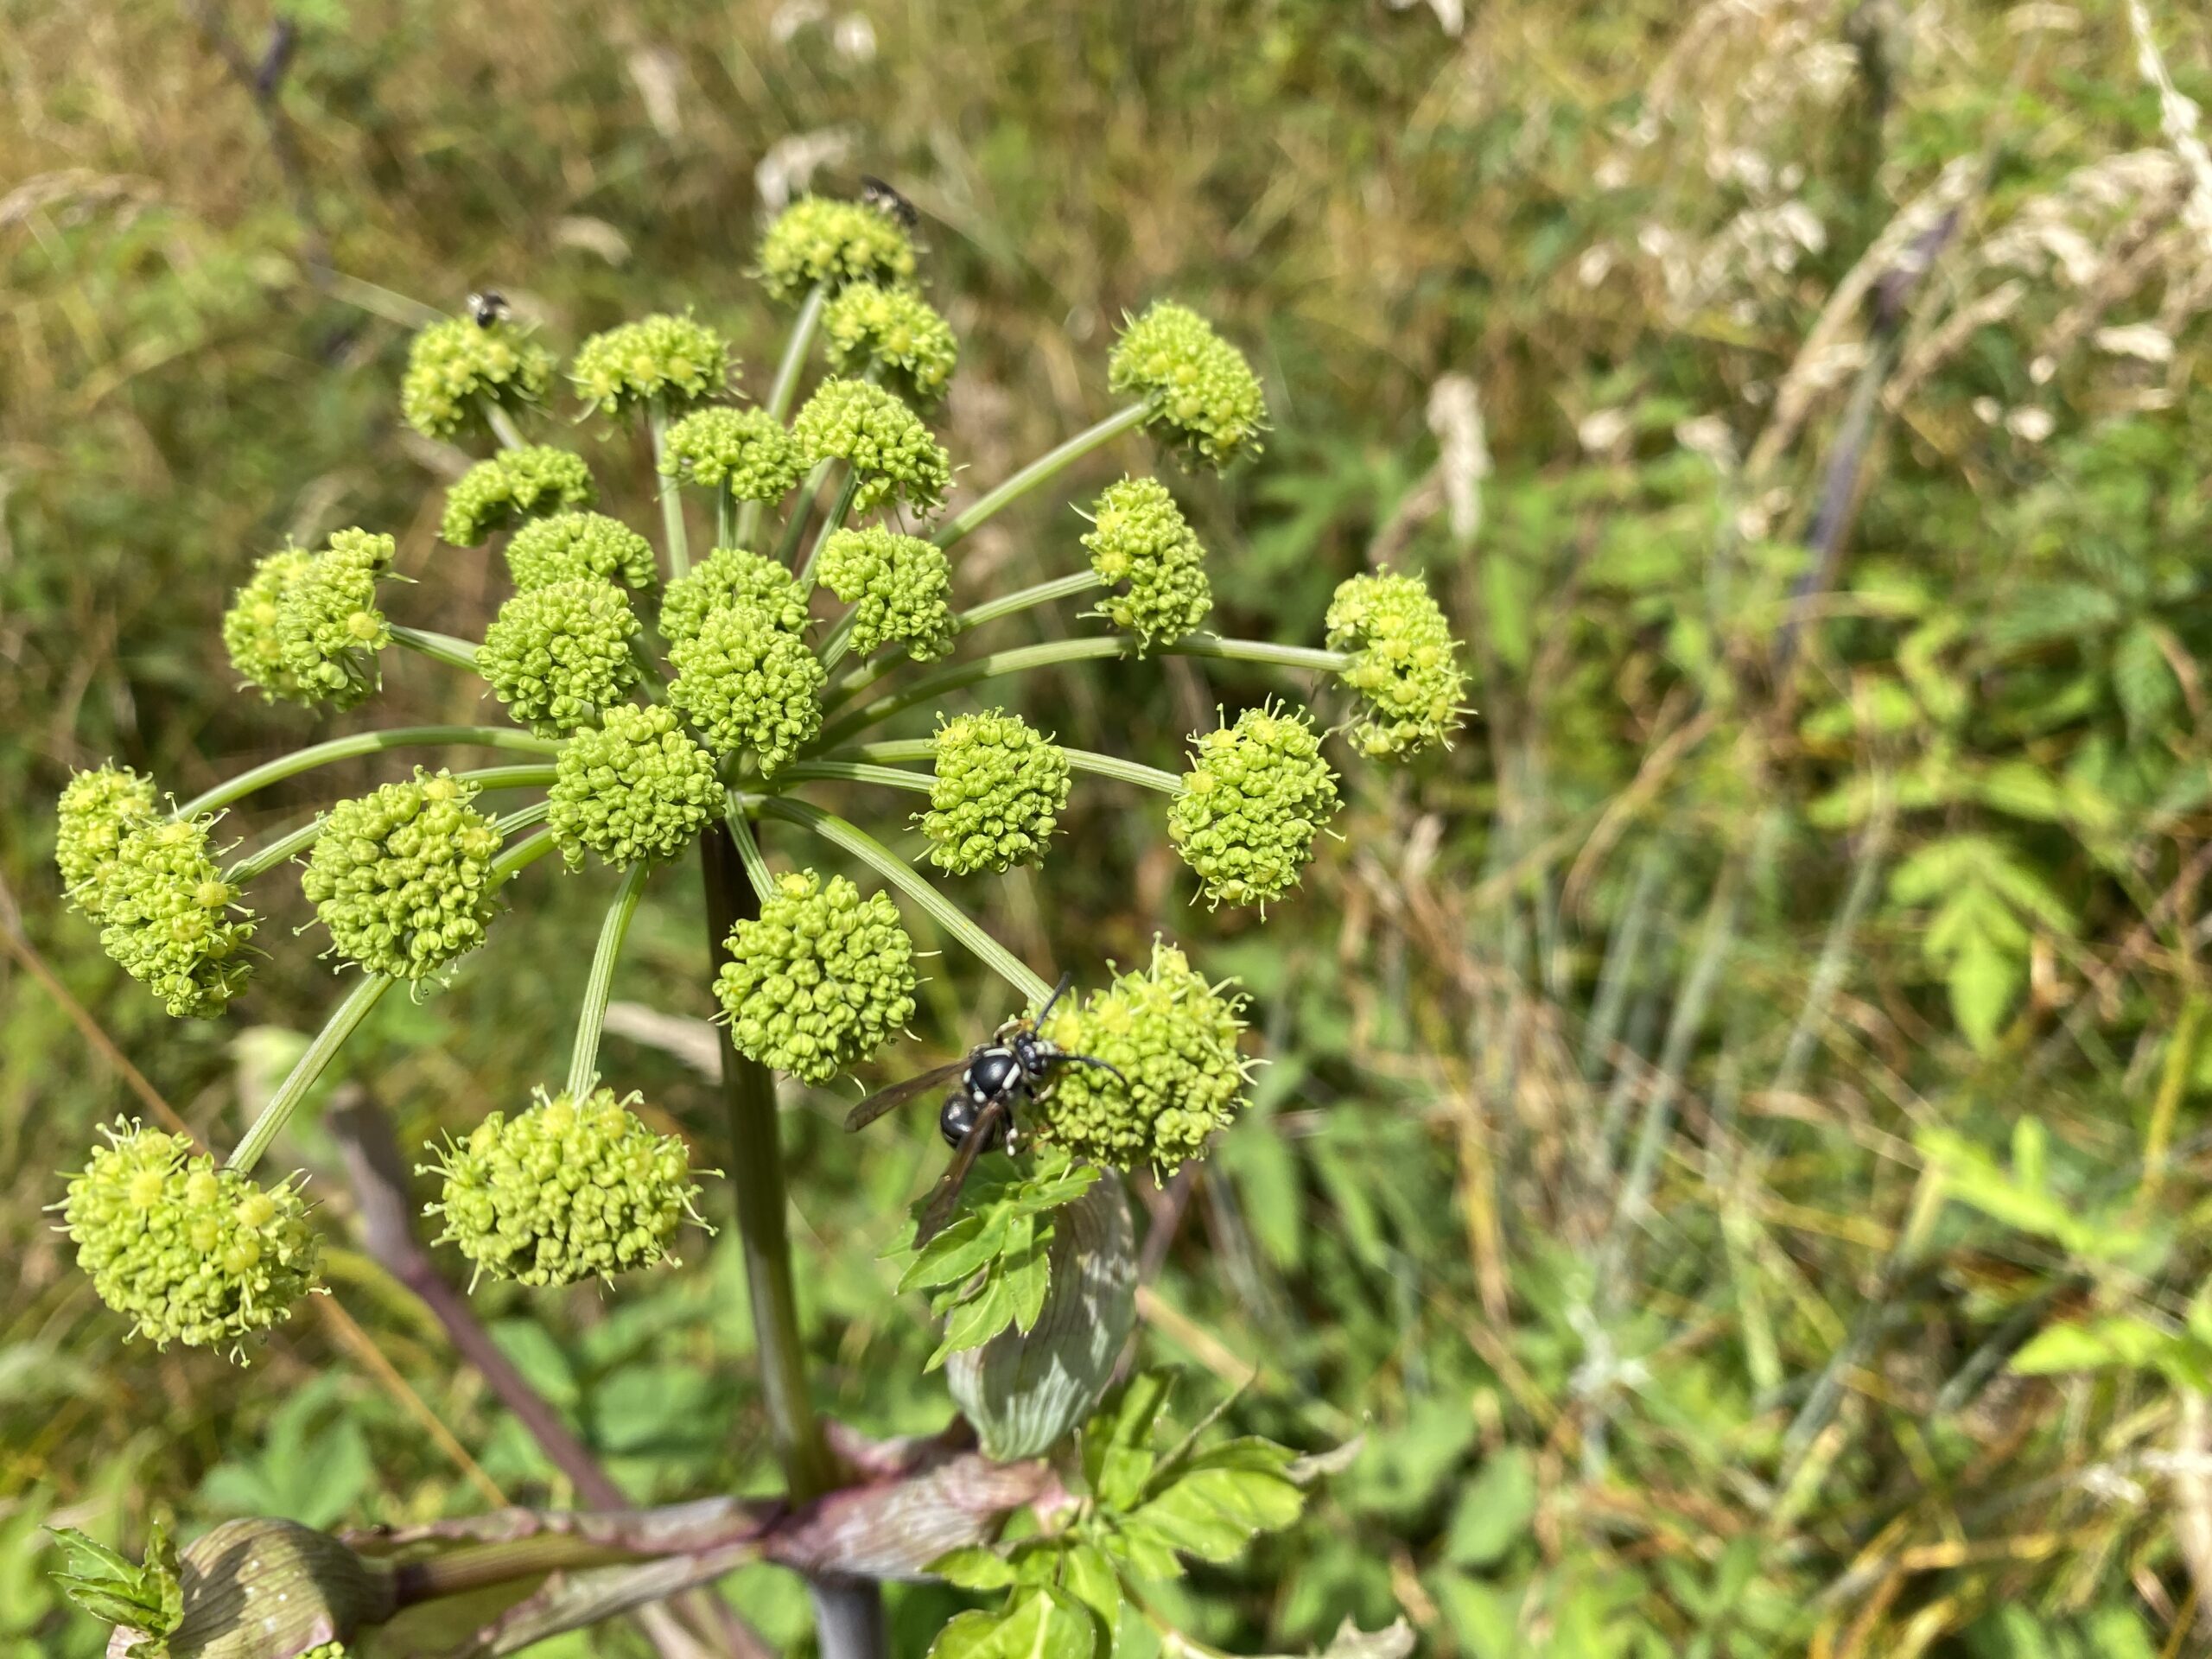 Angelica triquinata, Filmy Angelica, attracts pollinating insects to its bloom. Rounded clusters of yellow-green flowers form rosettes atop its stalks.